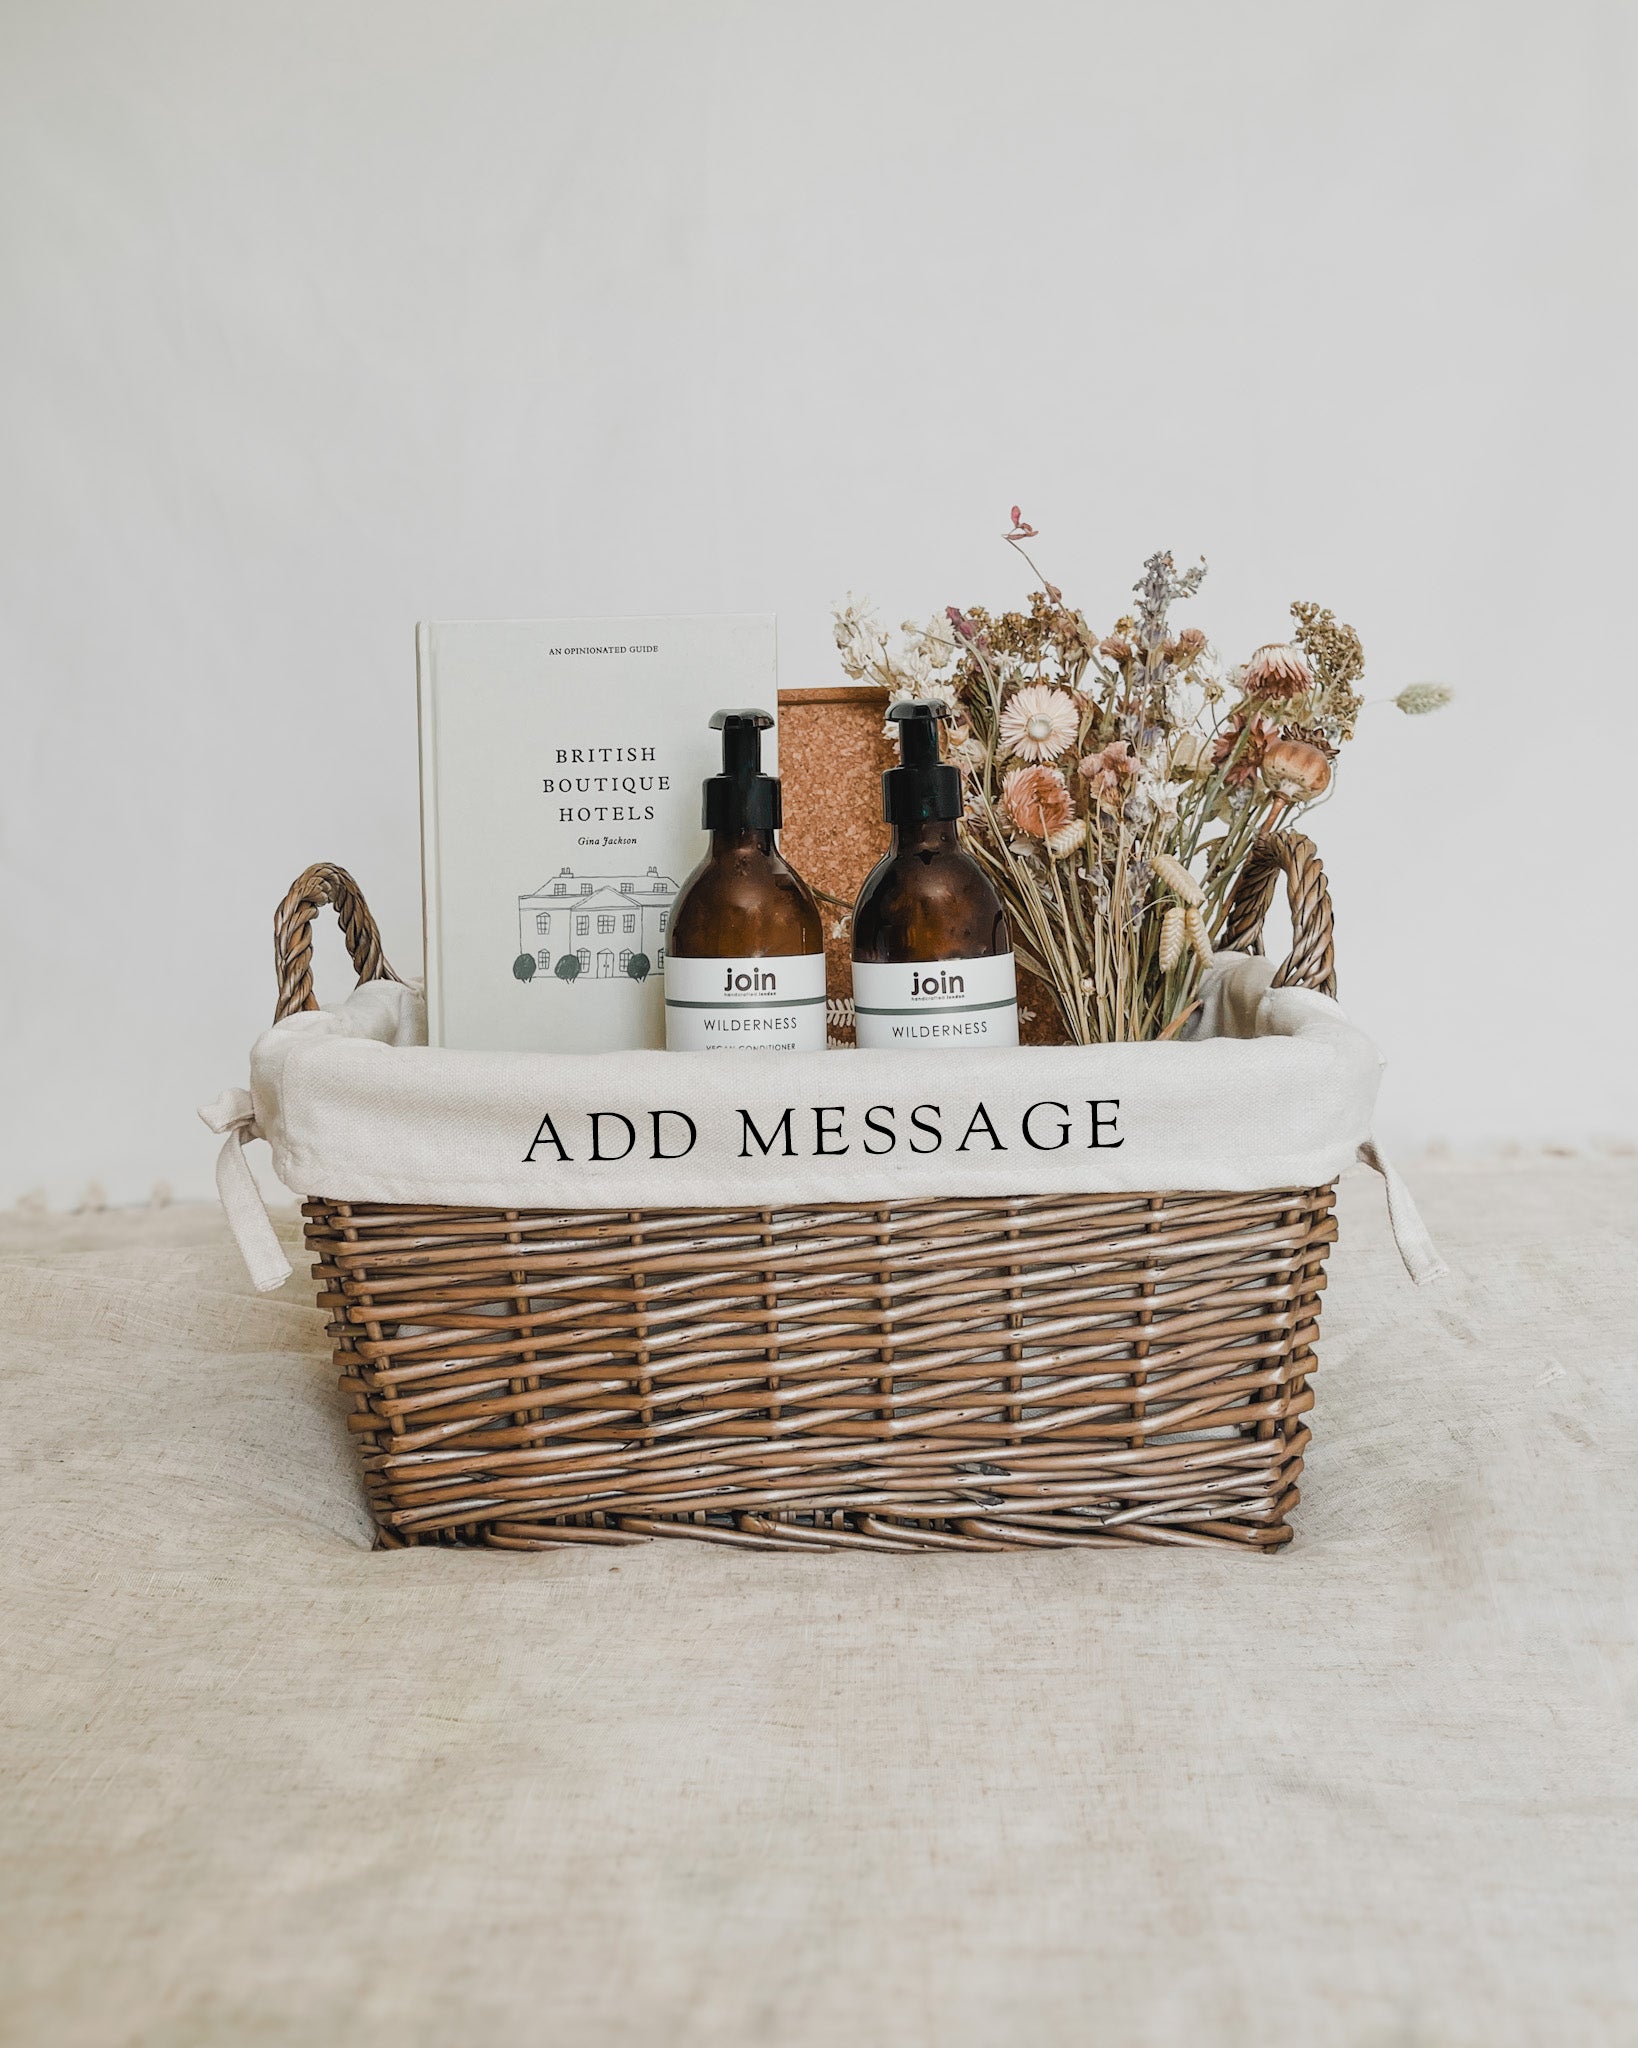 Personalised Handled Wicker Basket | Style Storage Solutions For Gifts and holiday cottages